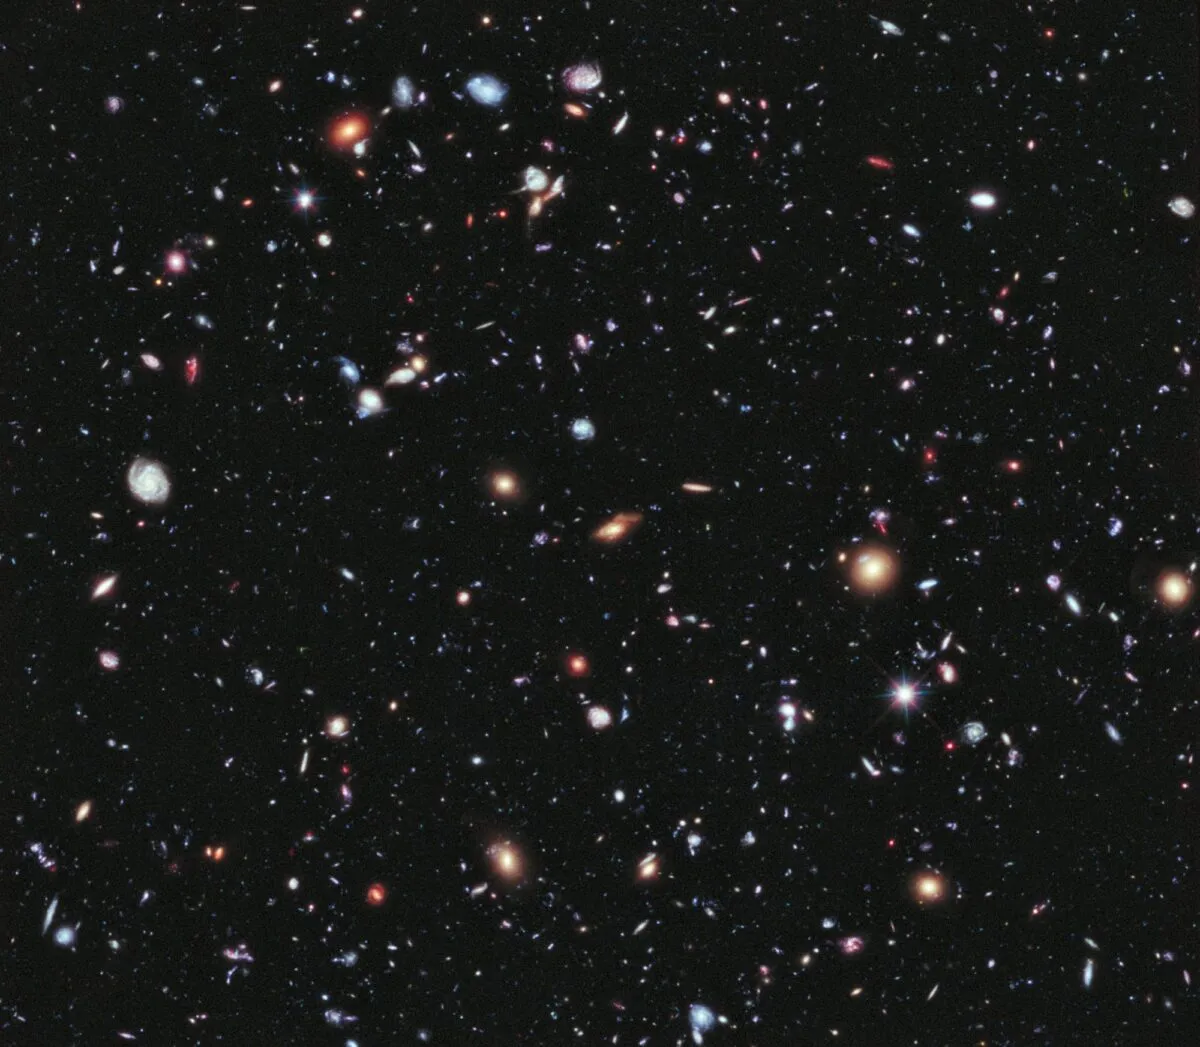 It seems likely there are aliens out there considering the vastness of the Universe. This is Hubble's eXtreme Deep Field. (Credit: NASA; ESA; G. Illingworth, D. Magee, and P. Oesch, University of California, Santa Cruz; R. Bouwens, Leiden University; and the HUDF09 Team)